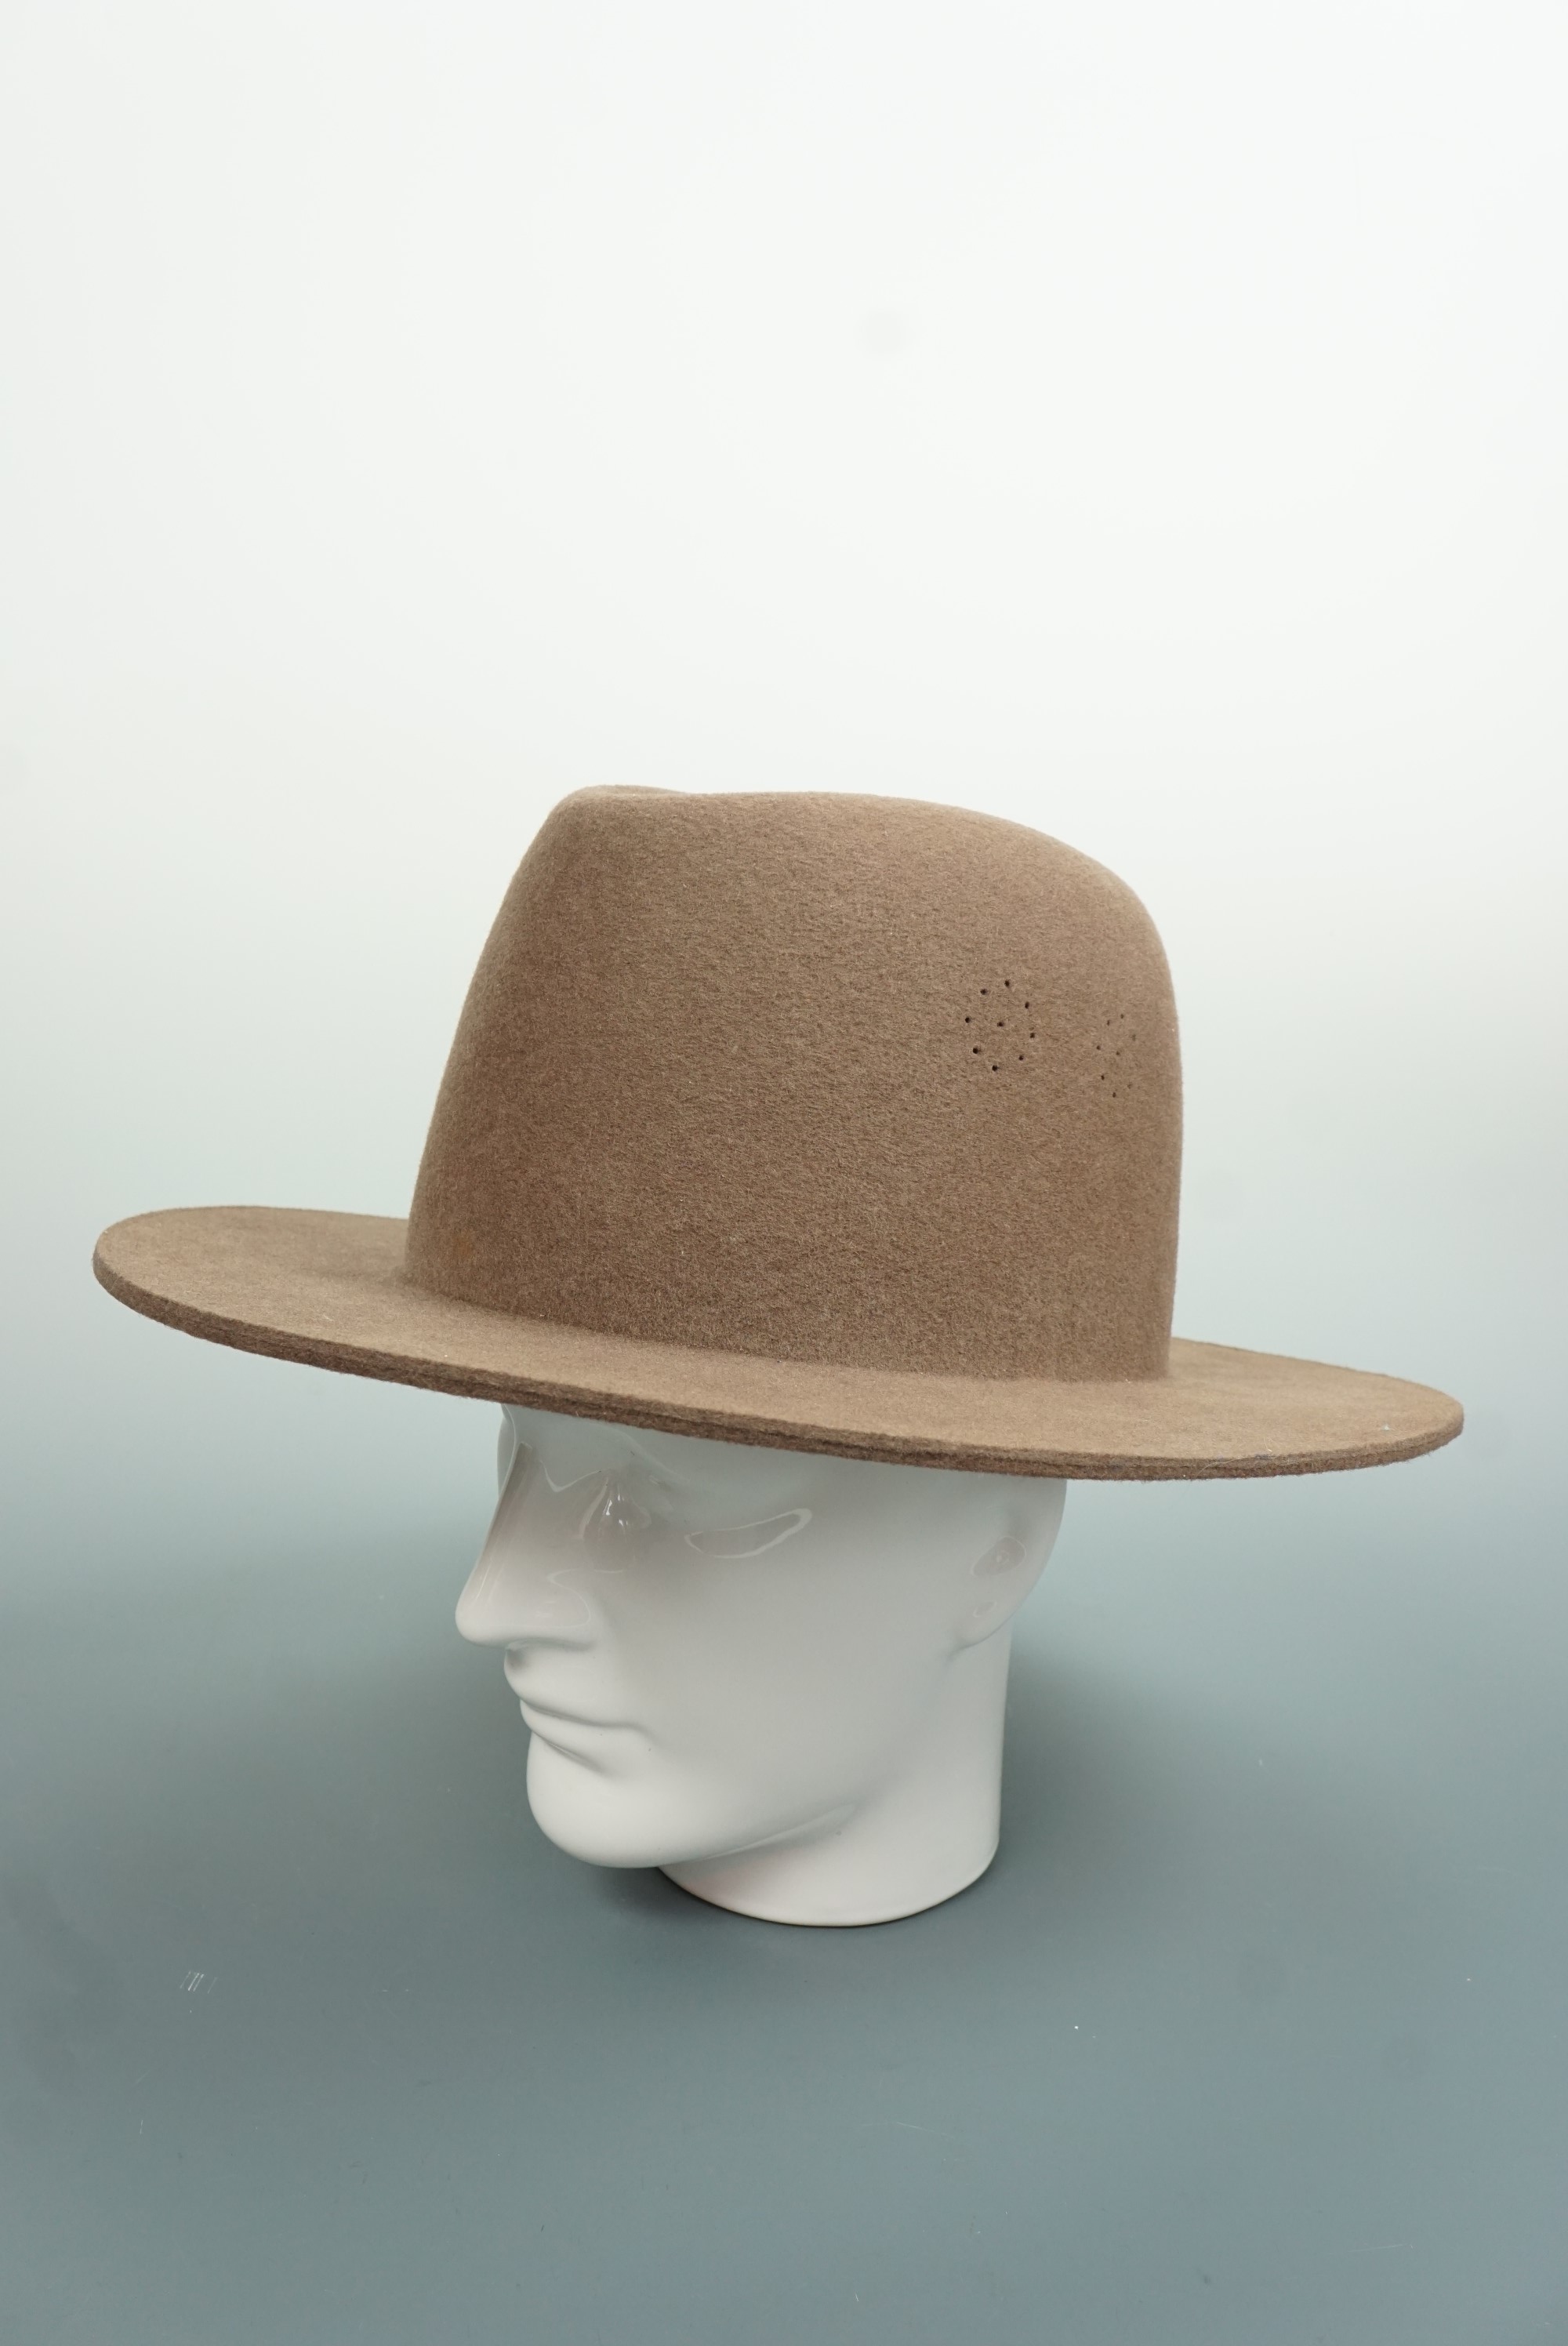 An un-issued post-War British army Gurkha bush hat, bearing a NATO stores reference label, size 58